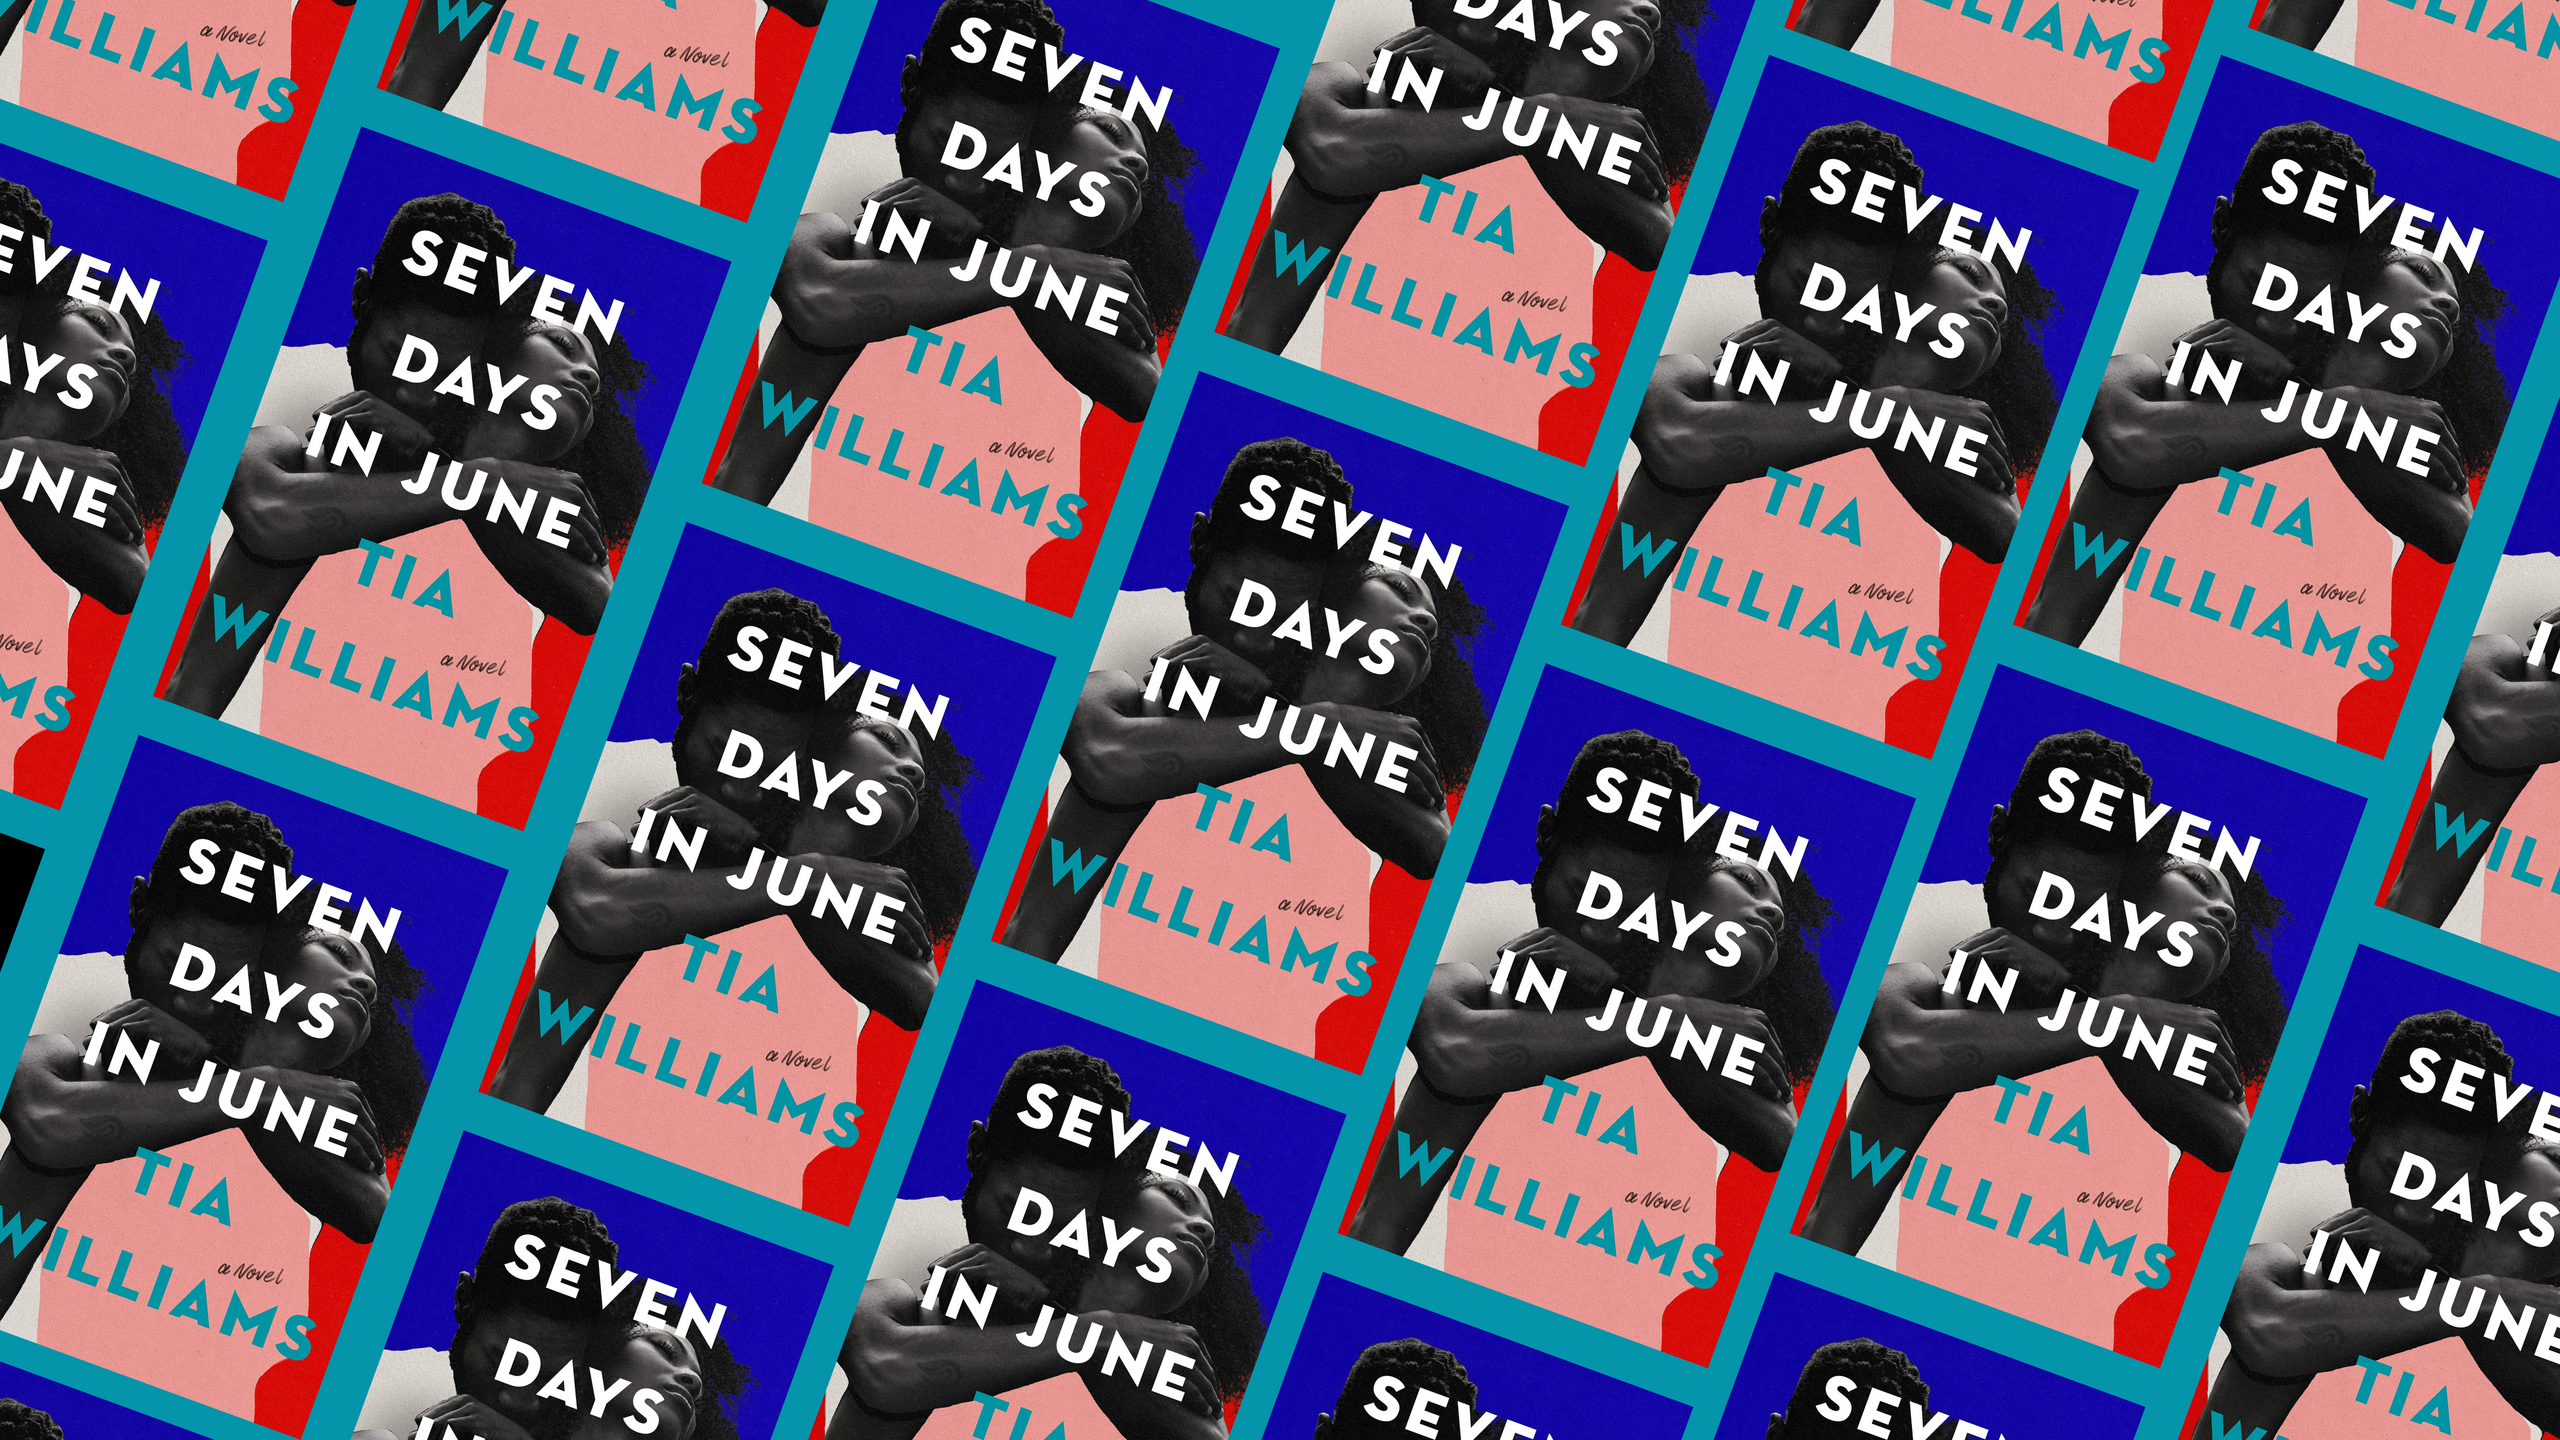 What To Read After Seven Days In June